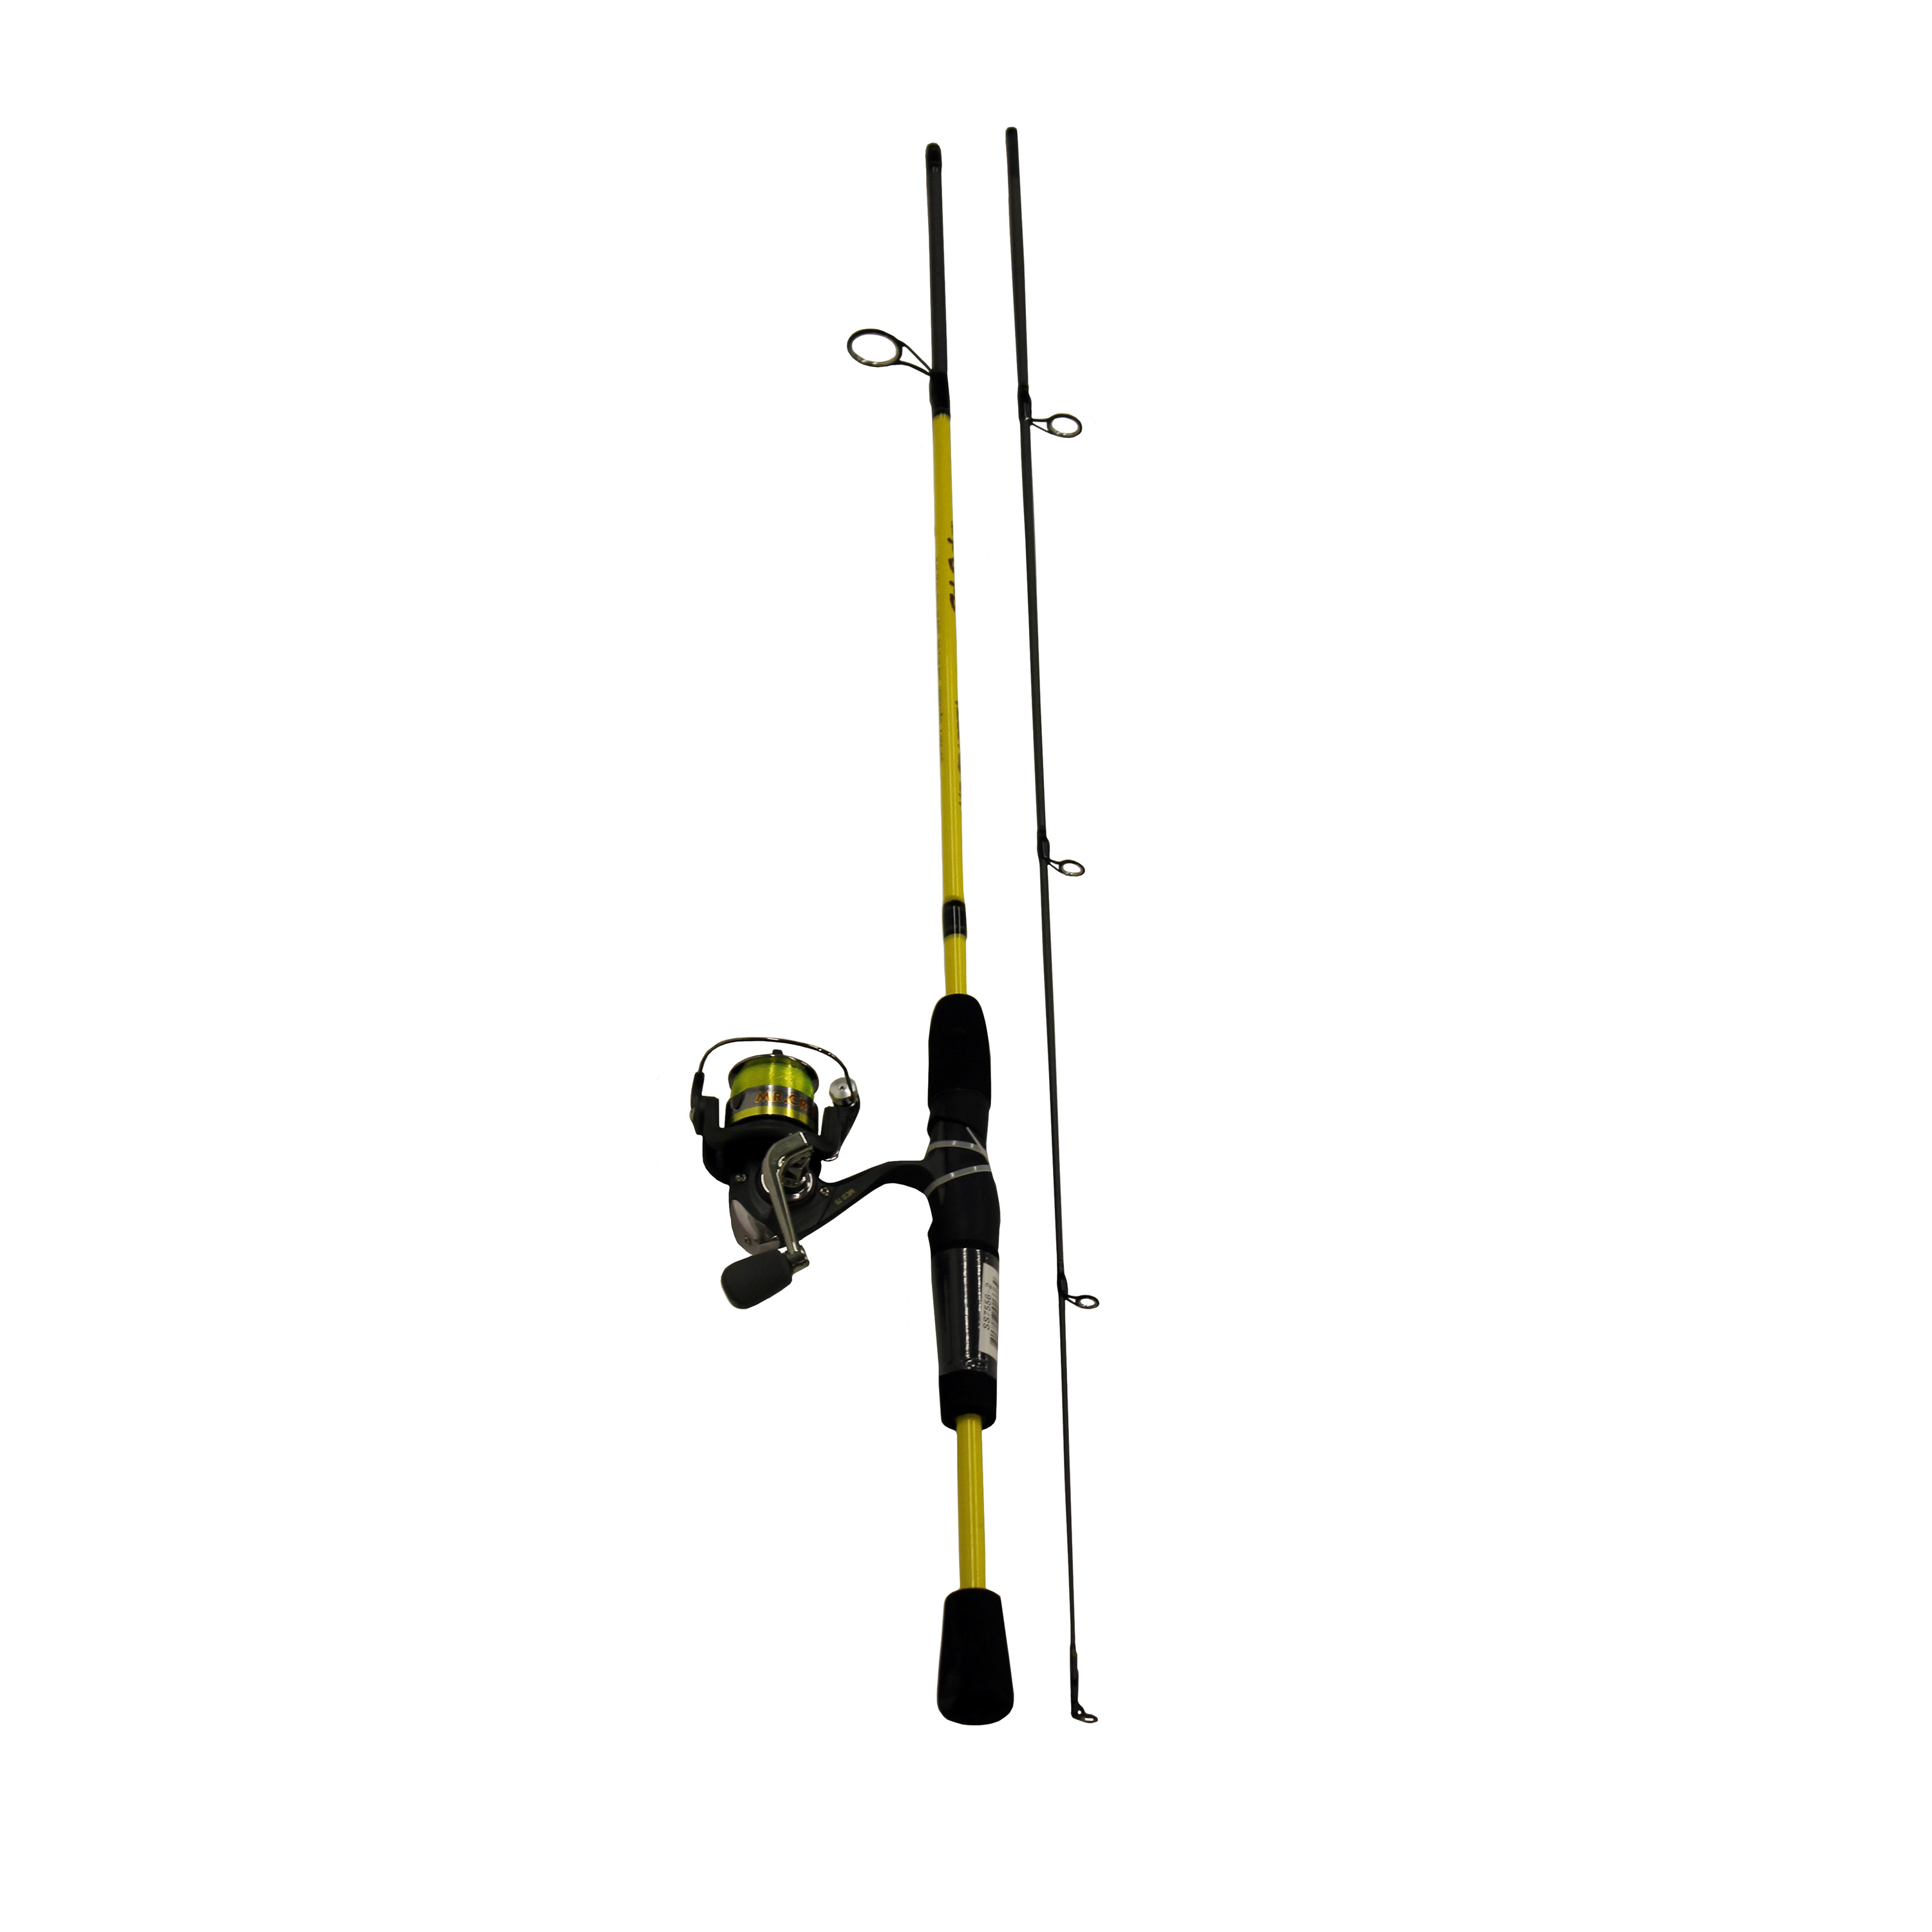 Mr. Crappie Slab Shaker Spinning Rod and Reel Fishing Combo - image 2 of 12